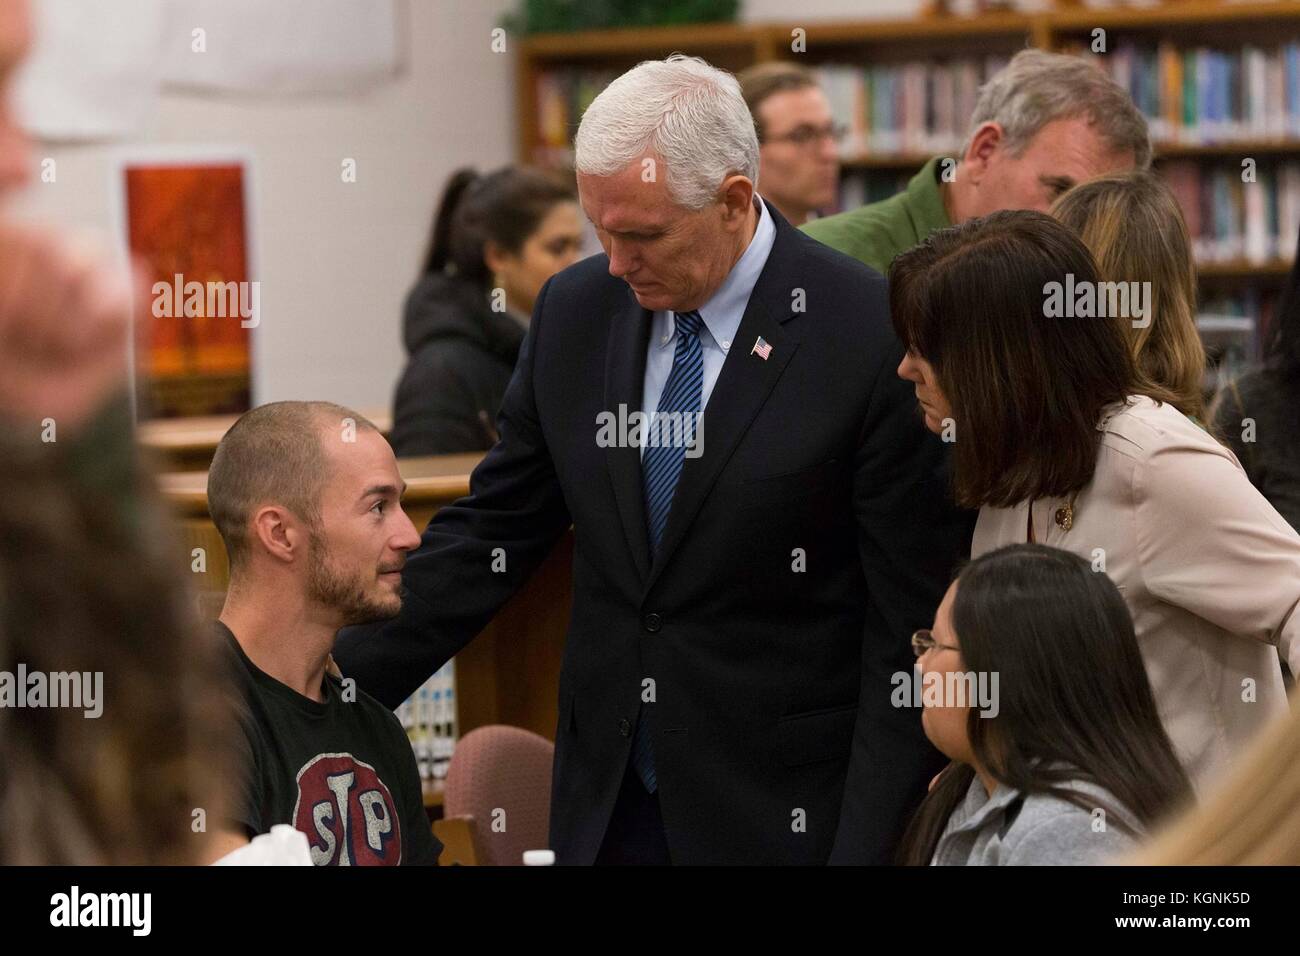 Texas, USA. 8th November, 2017. U.S. Vice President Mike Pence and Karen Pence comforts victims and family members of the Sutherland Springs Baptist Church shooting November 8, 2017 in Floresville, Texas. Credit: Planetpix/Alamy Live News Stock Photo